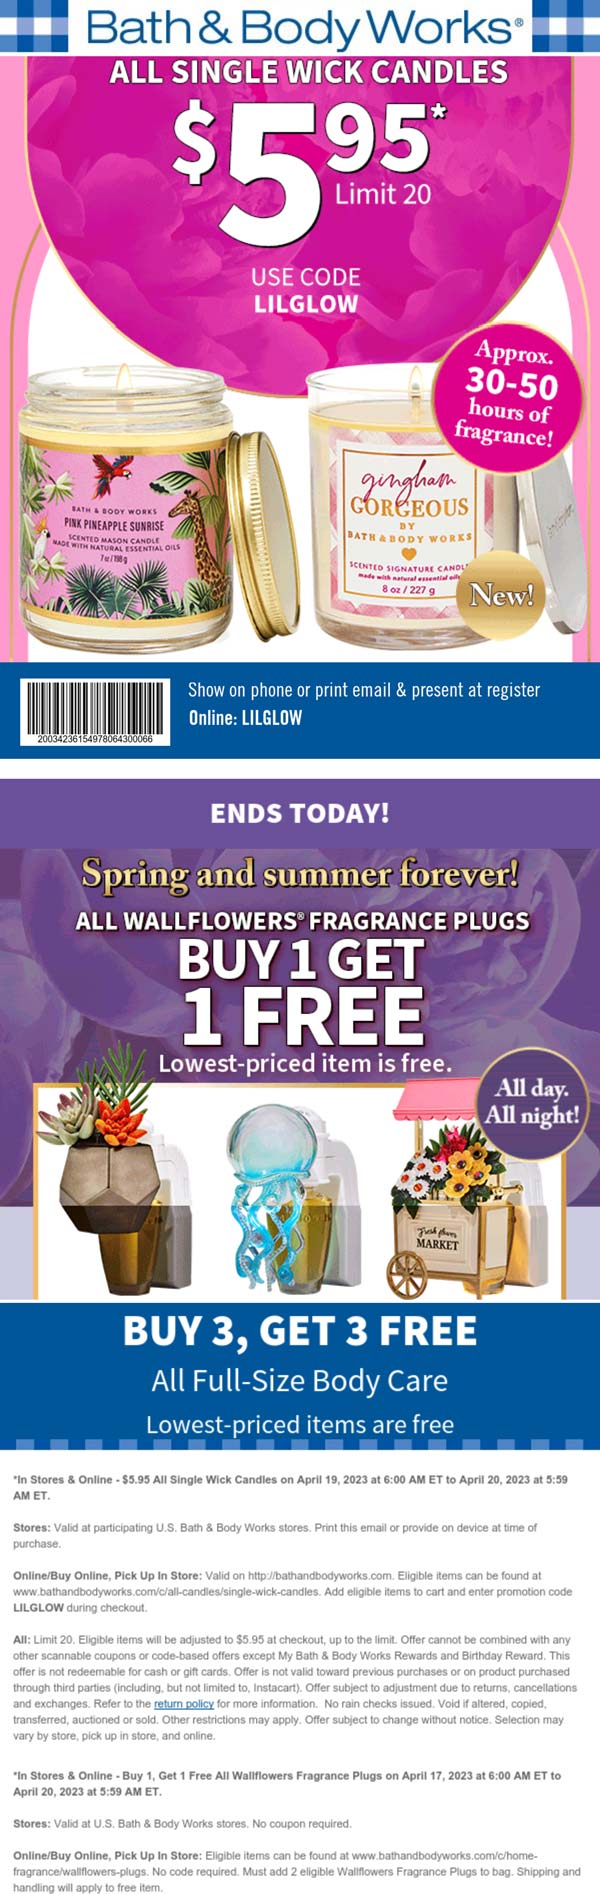 Bath & Body Works stores Coupon  6-for-3 on all body care & more at Bath & Body Works, ditto online #bathbodyworks 